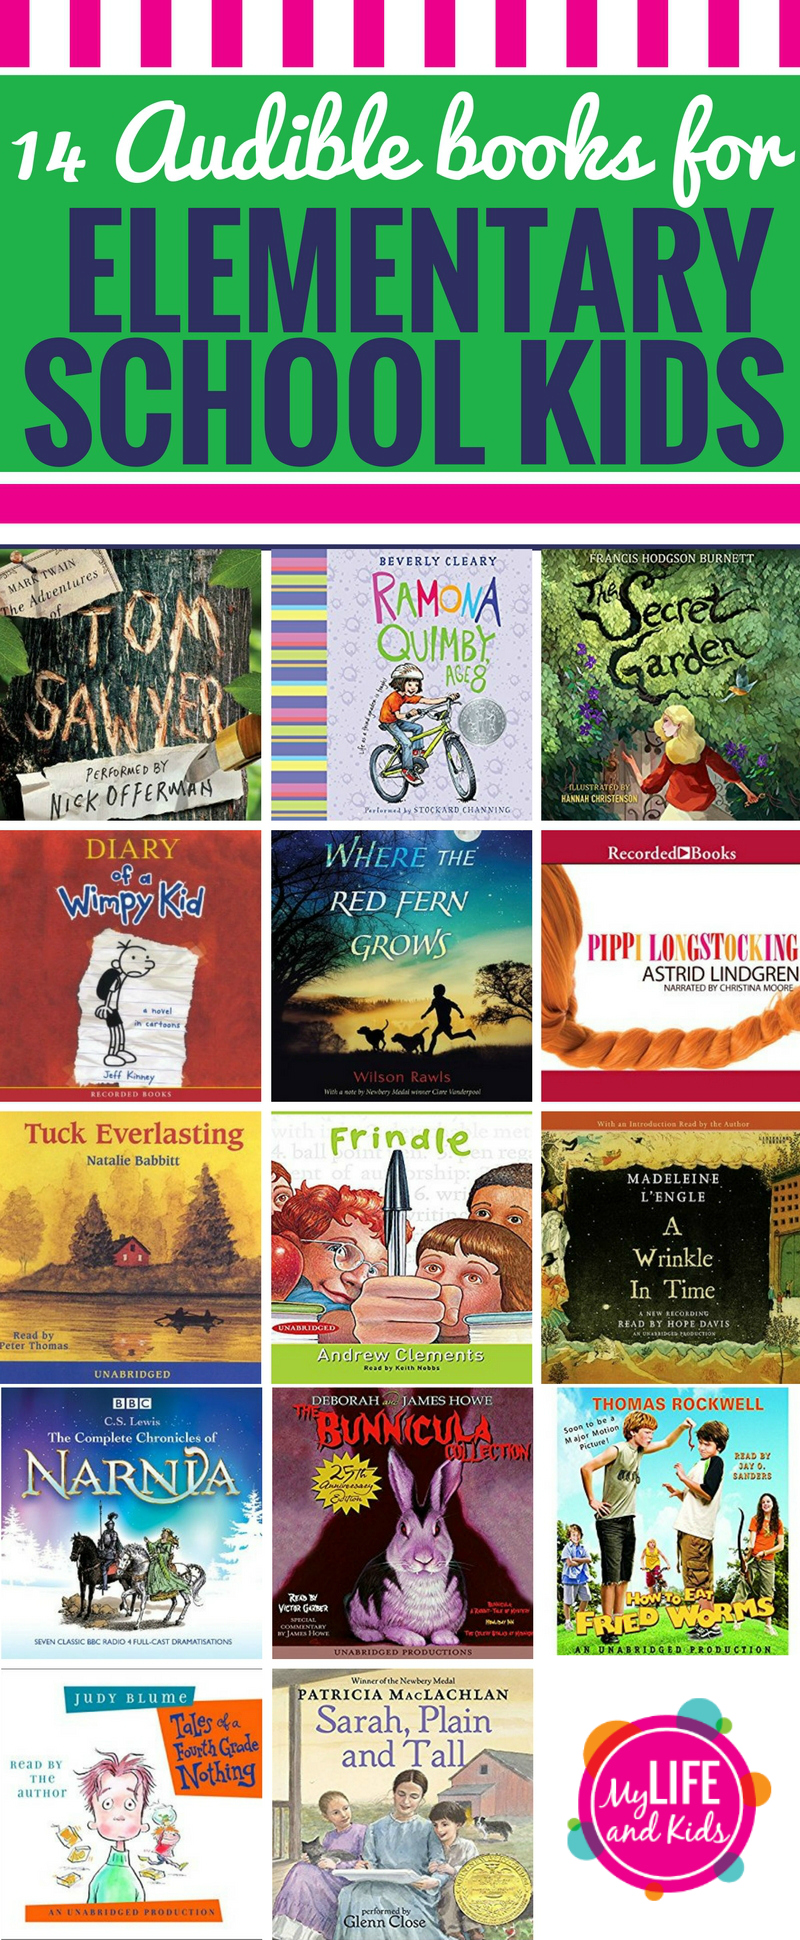 Have kids in elementary school? I'm sharing 14 of the best Audible books for kids in elementary school. Your 1st - 5th graders will love these books (and you will too.)